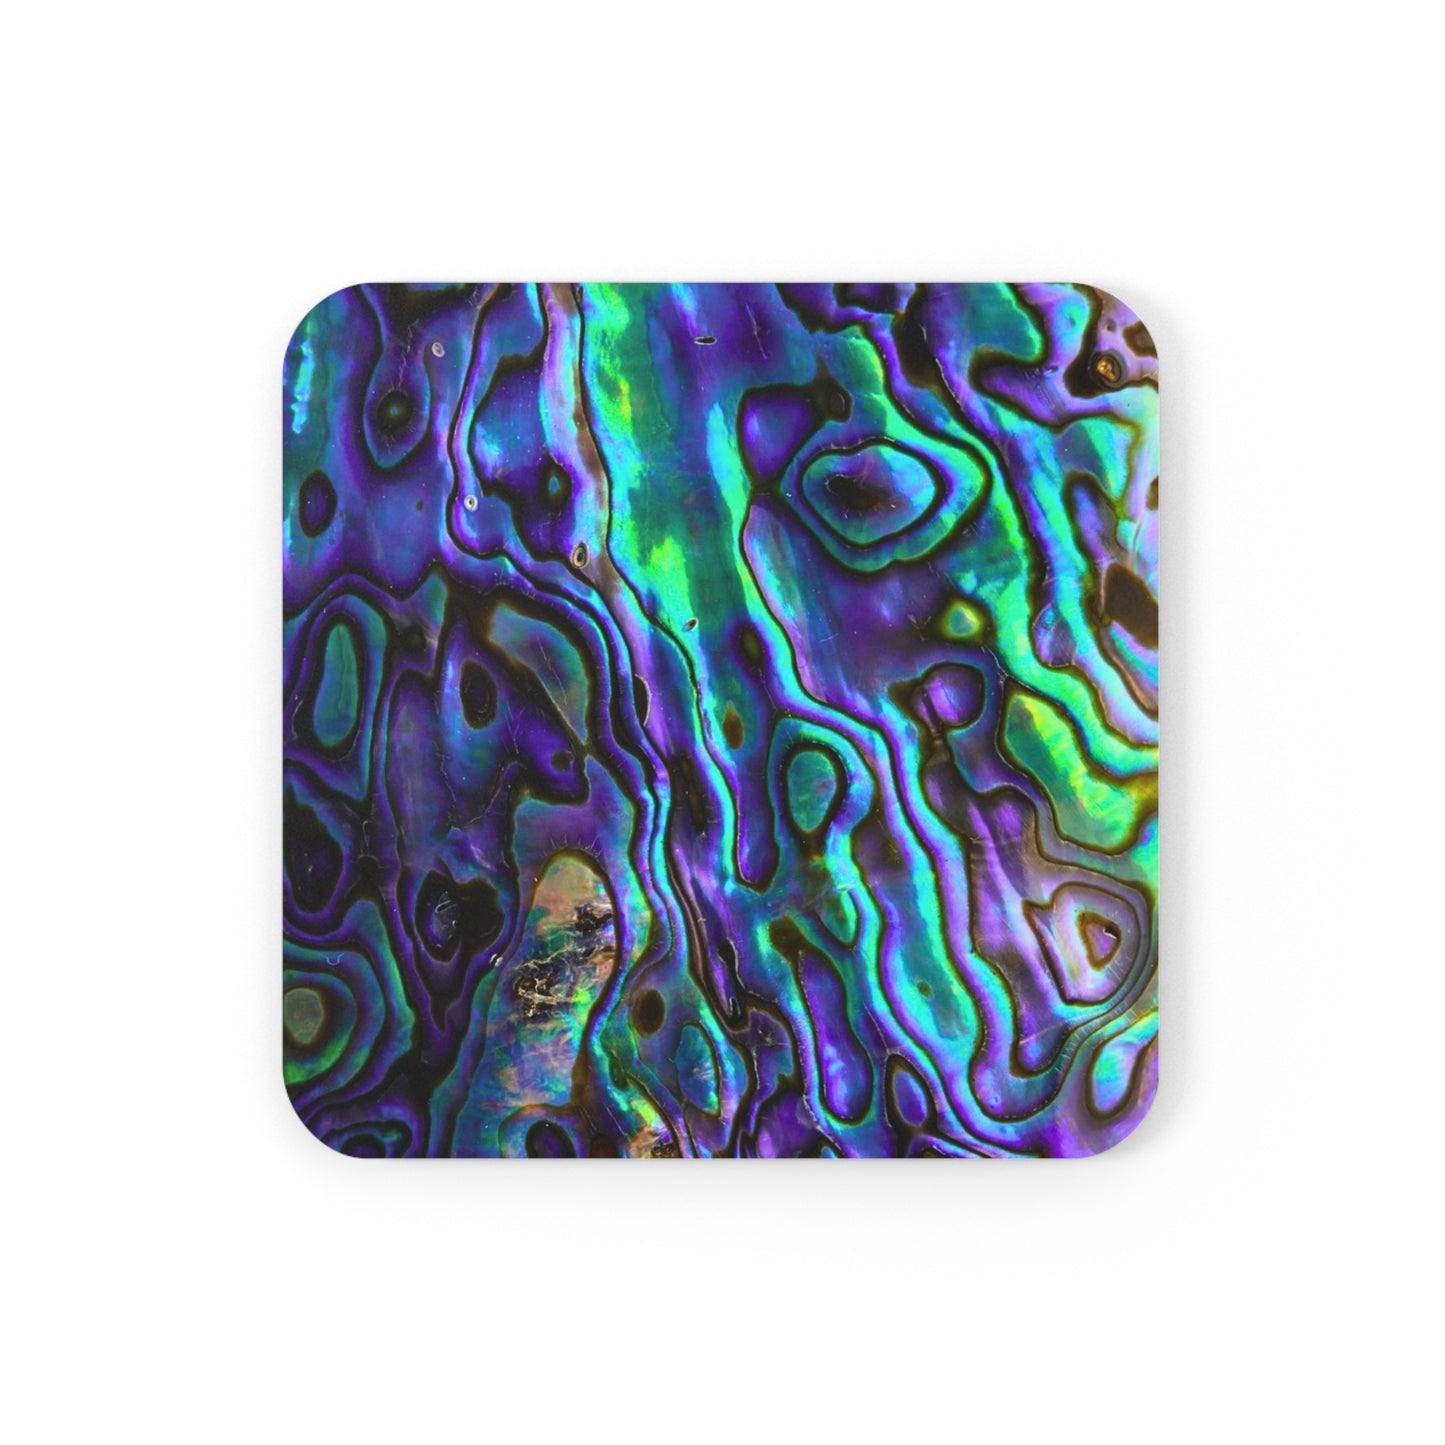 Abalone Jewels Natural Shell Ocean Abstract Cocktail Party Beverage Entertaining Decorative Corkwood Coaster Set